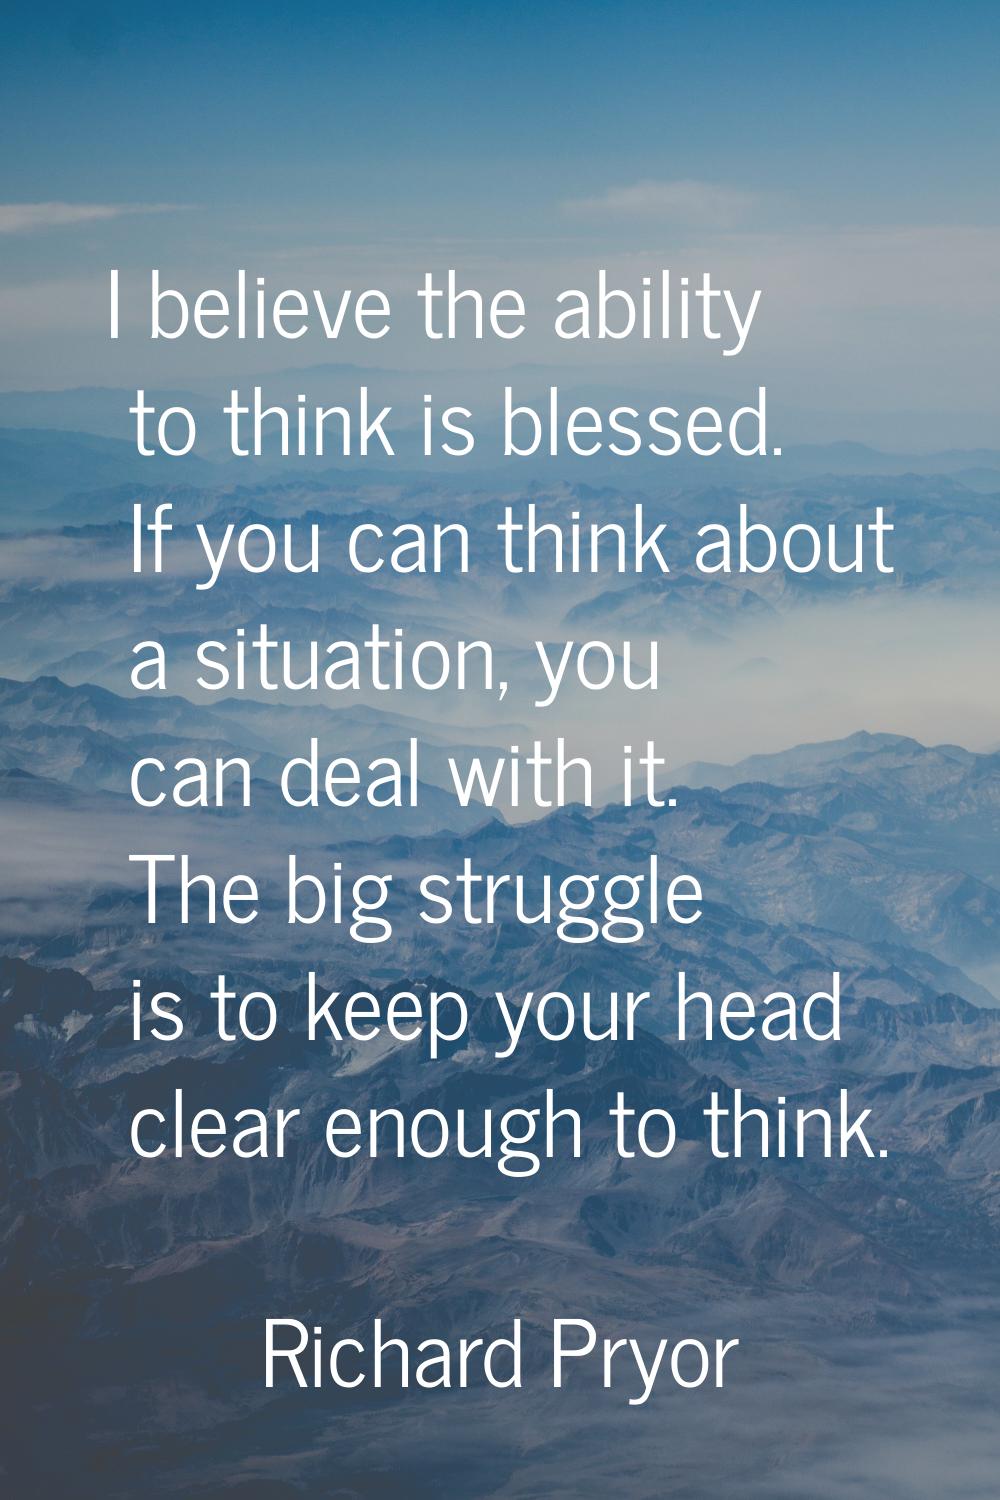 I believe the ability to think is blessed. If you can think about a situation, you can deal with it